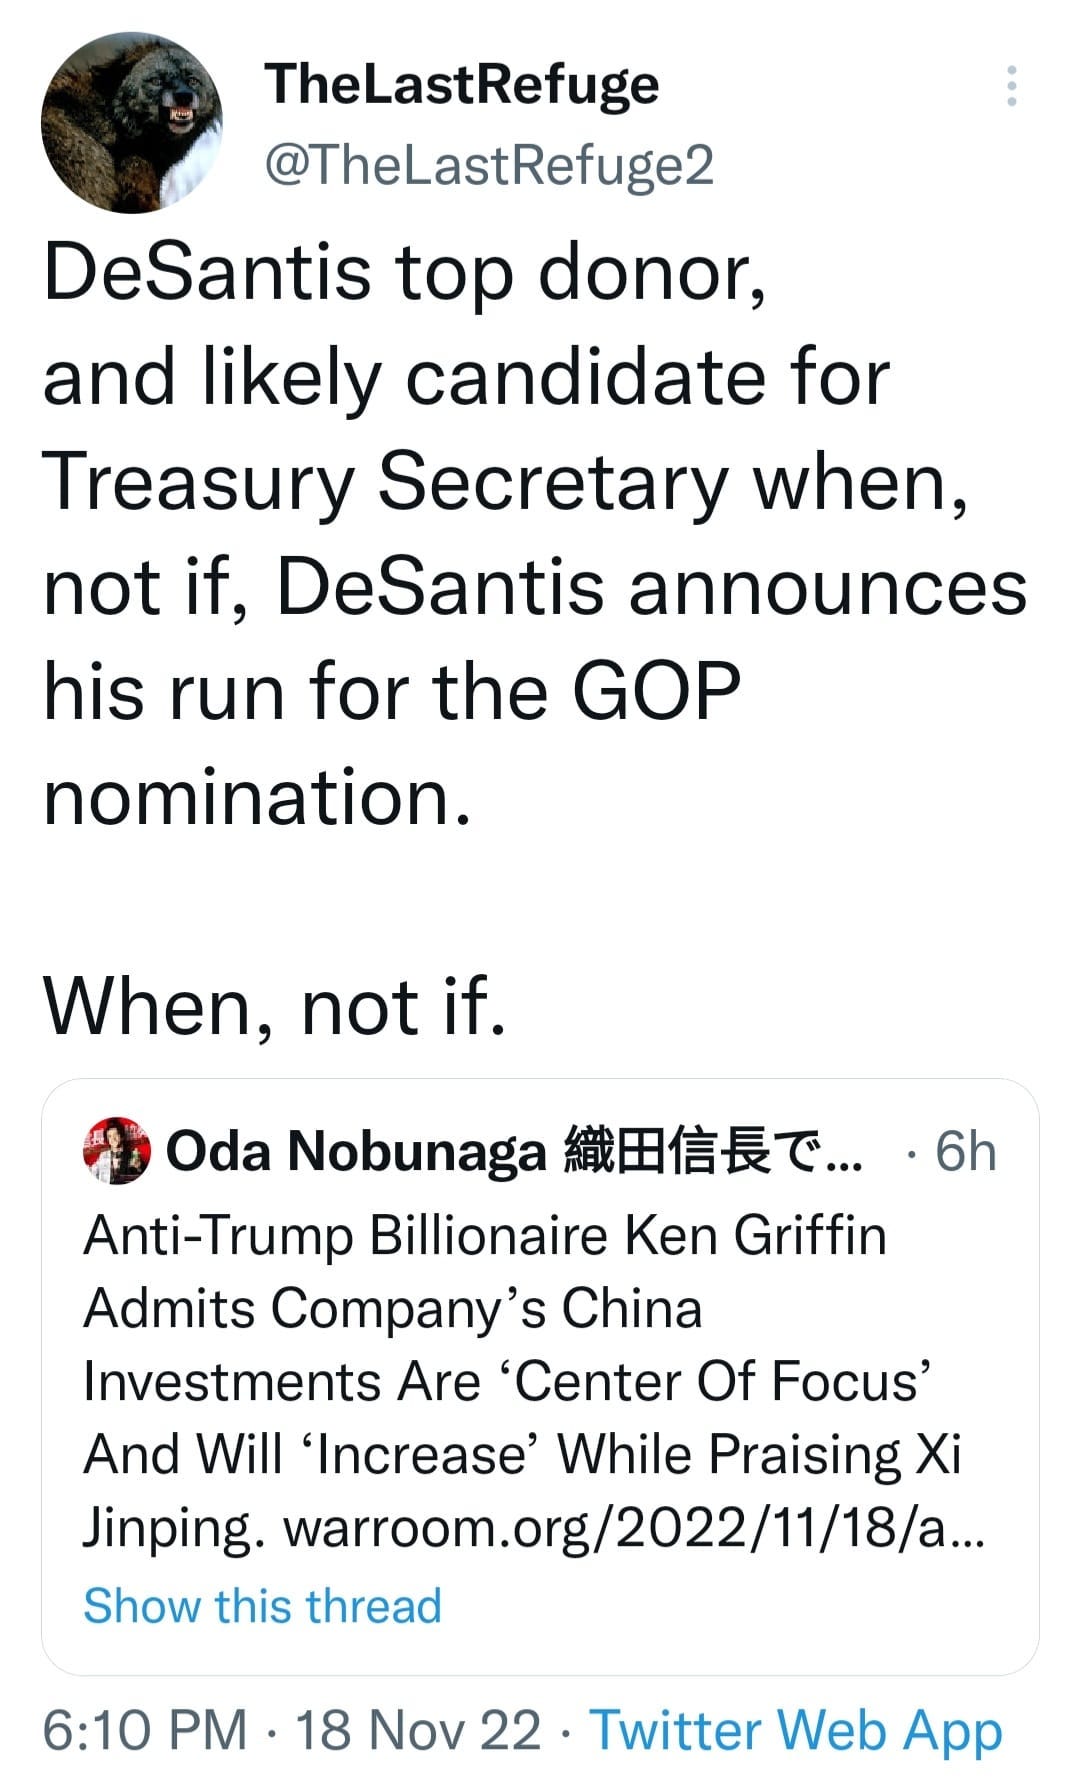 May be an image of text that says 'TheLastRefuge @TheLastRefuge2 DeSantis top donor, and likely candidate for Treasury Secretary when, not if, DeSantis announces his run for the GOP nomination. When, not if. Oda Nobunaga 織田信長で.. .6h Anti-Trump Billionaire Ken Griffin Admits Company' China Investments Are 'Center Of Focus' And Will 'Increase' While Praising Xi Jinping. warroom.org/2022/11/18/a... Show this thread 6:10 PM 18 Nov 22. Twitter Web App'